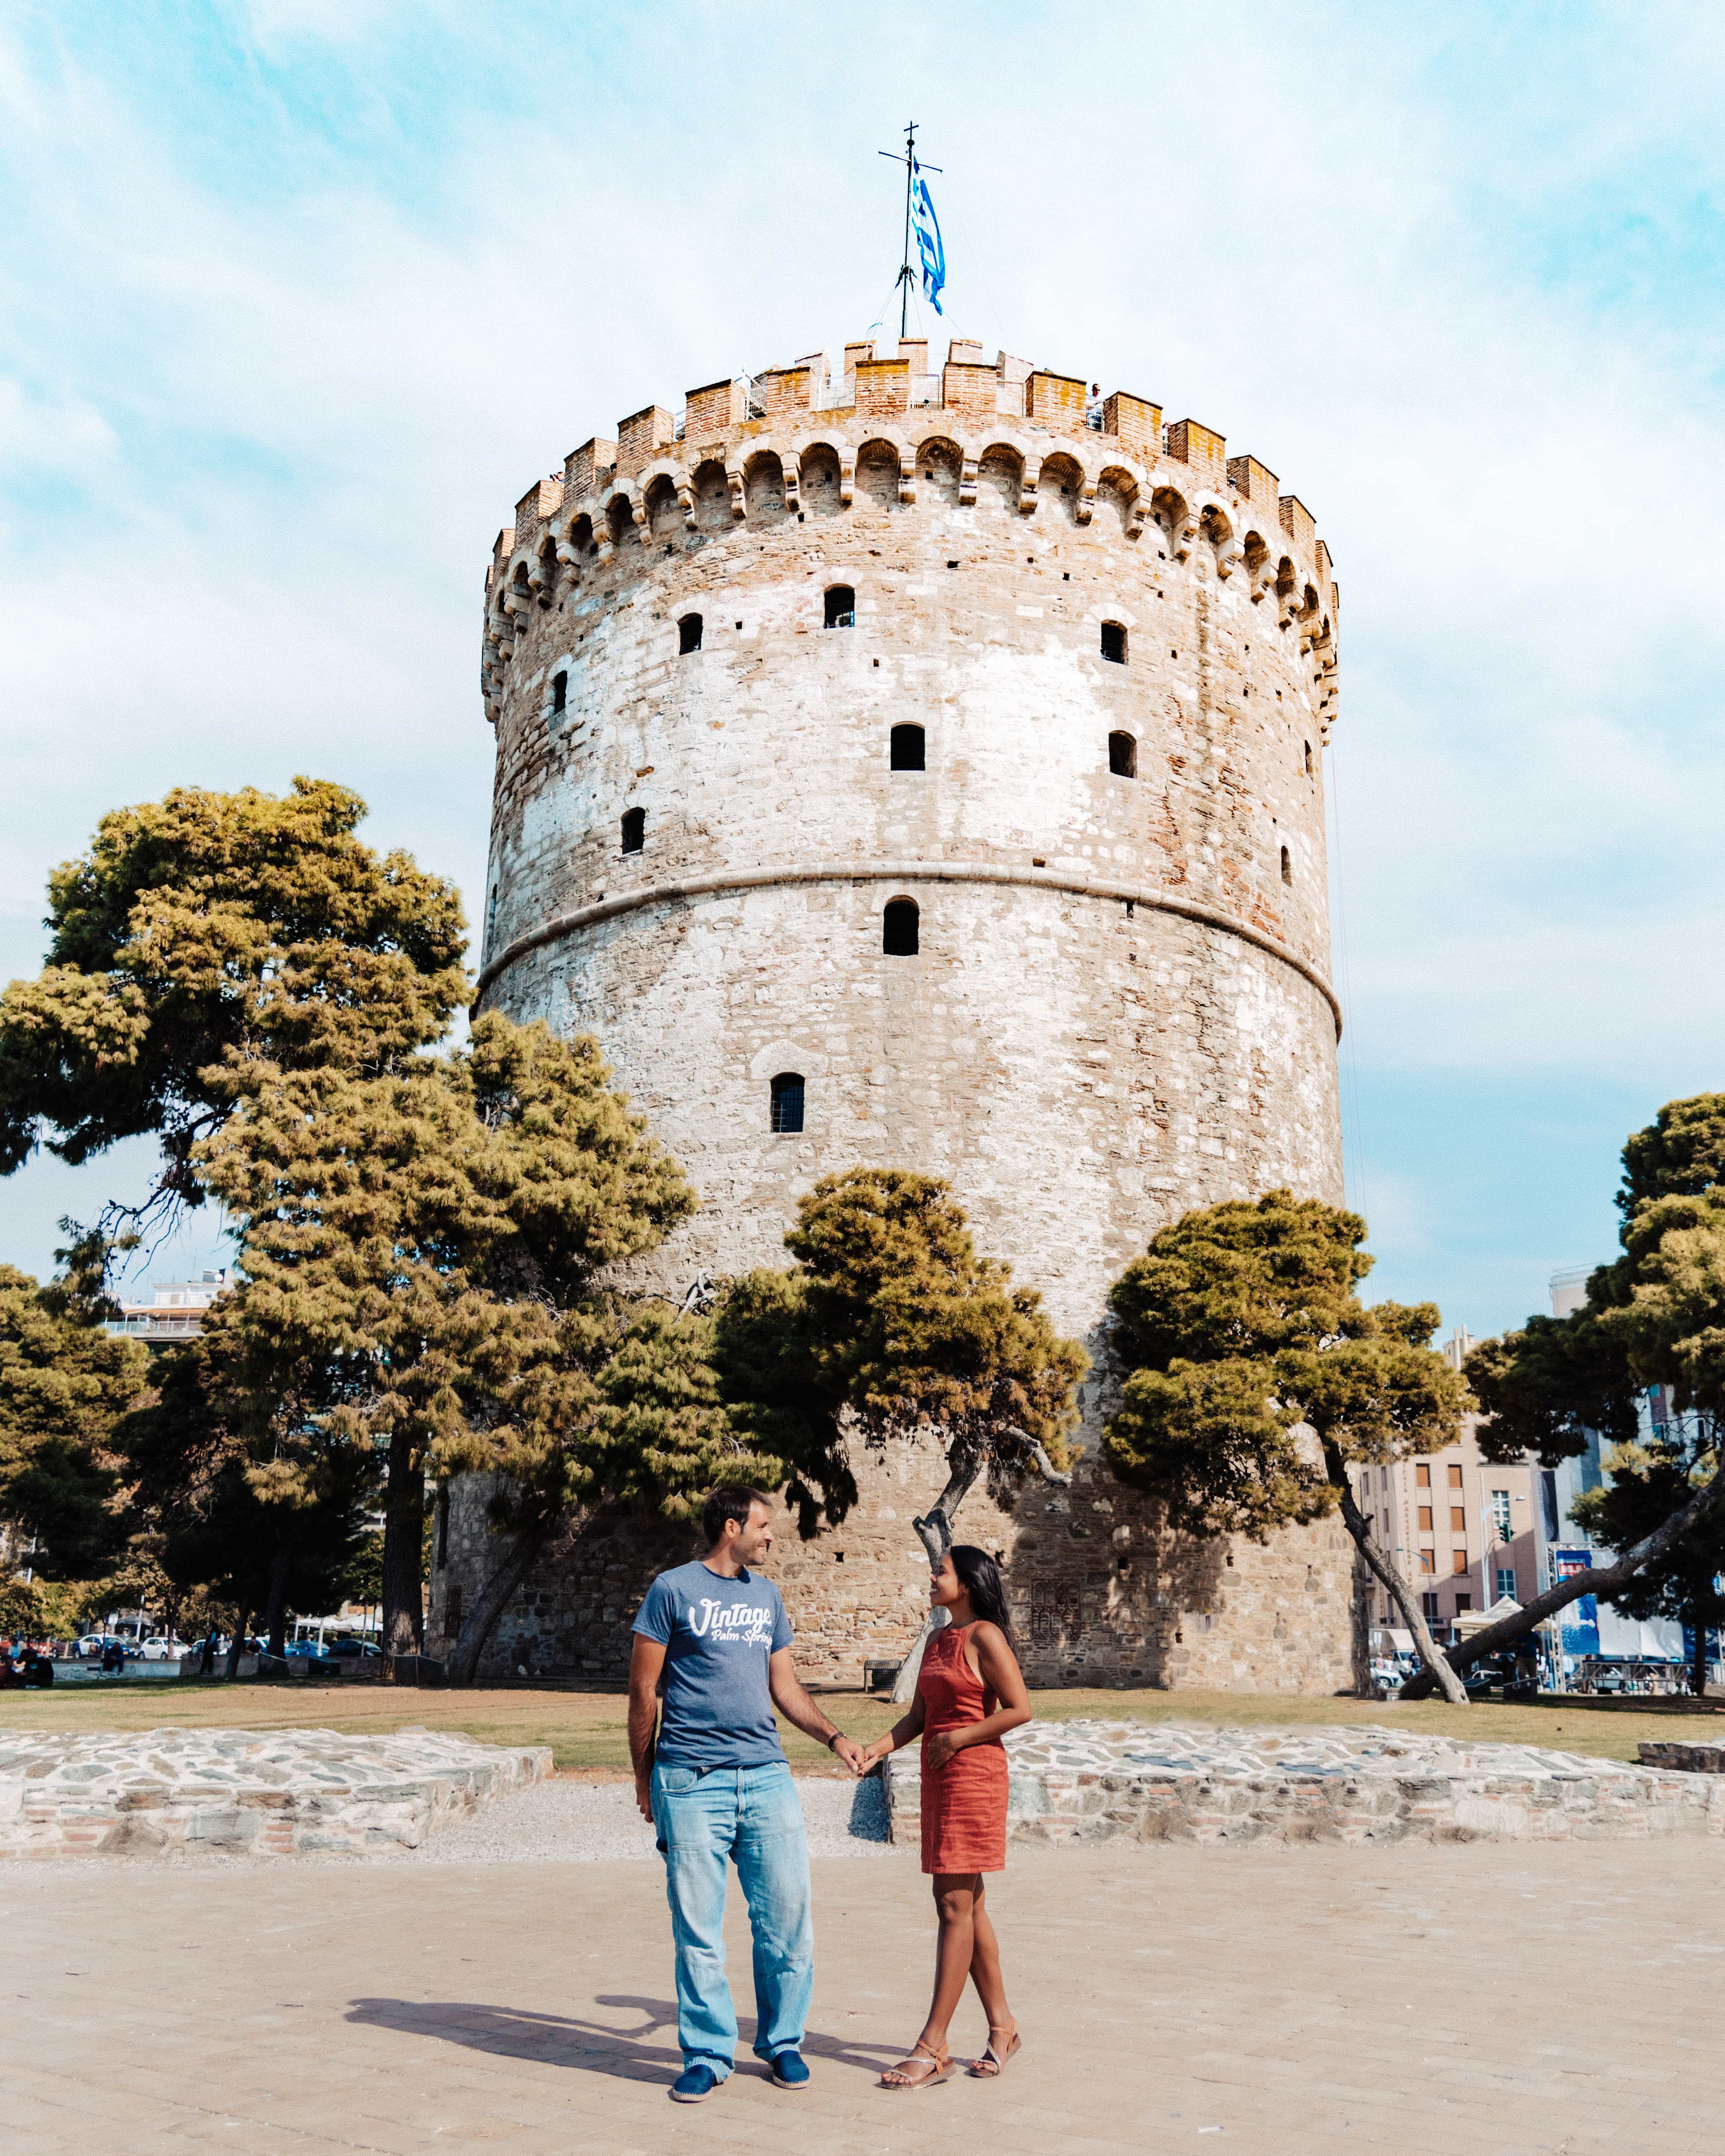 
instagrammable places in Thessaloniki, Instagrammable Spots Thessaloniki White Tower Thessaloniki, Thessaloniki travel guide, things to do in Thessaloniki, food to try in Thessaloniki, best time to visit thessaloniki, how to get to thessaloniki from the airport, how to get to thessaloniki, white tower